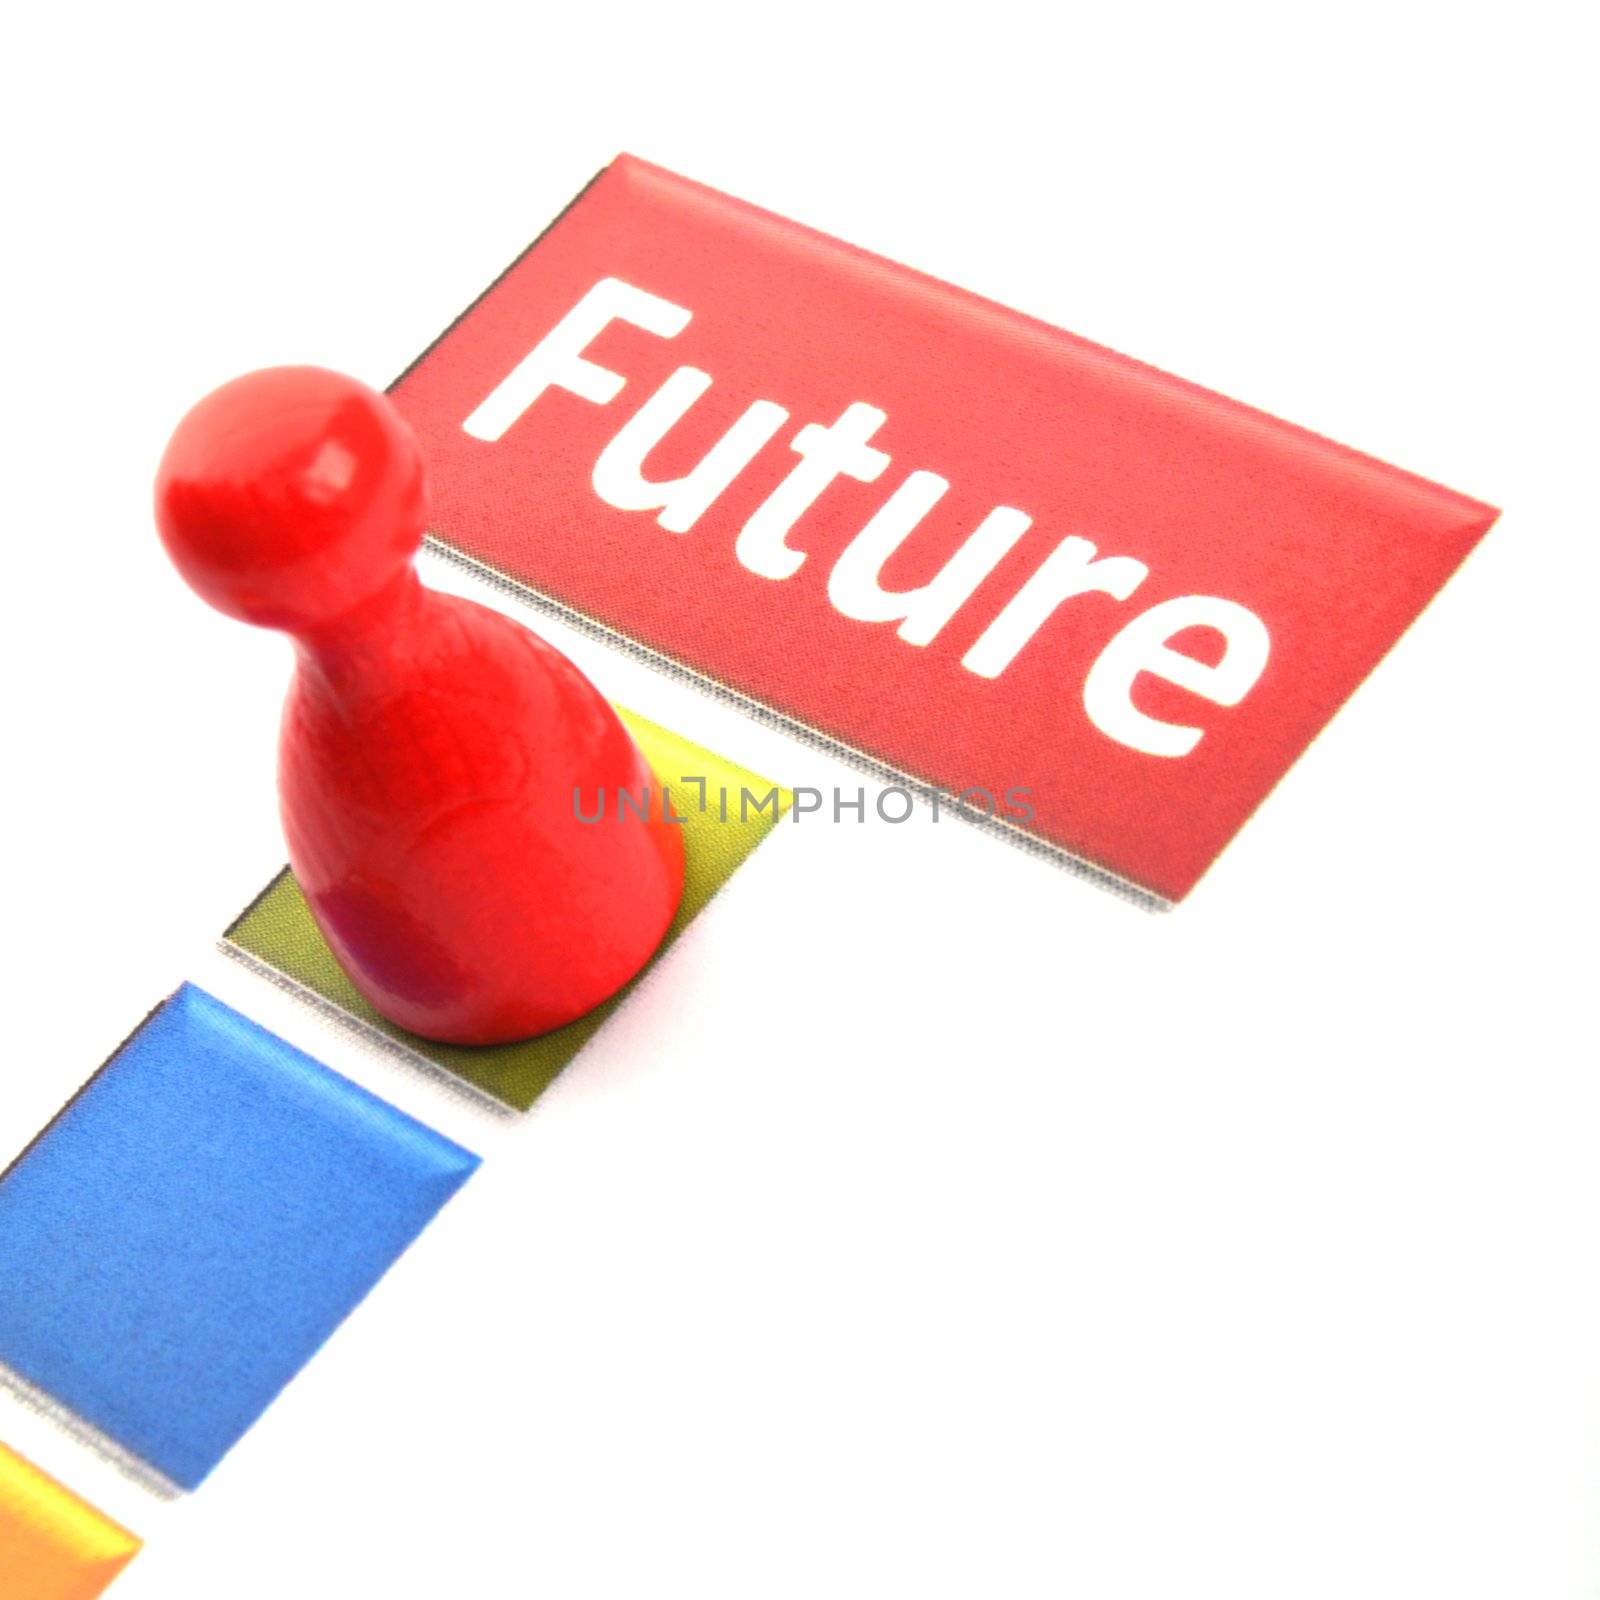 future word and pawn showing time or business investment concept